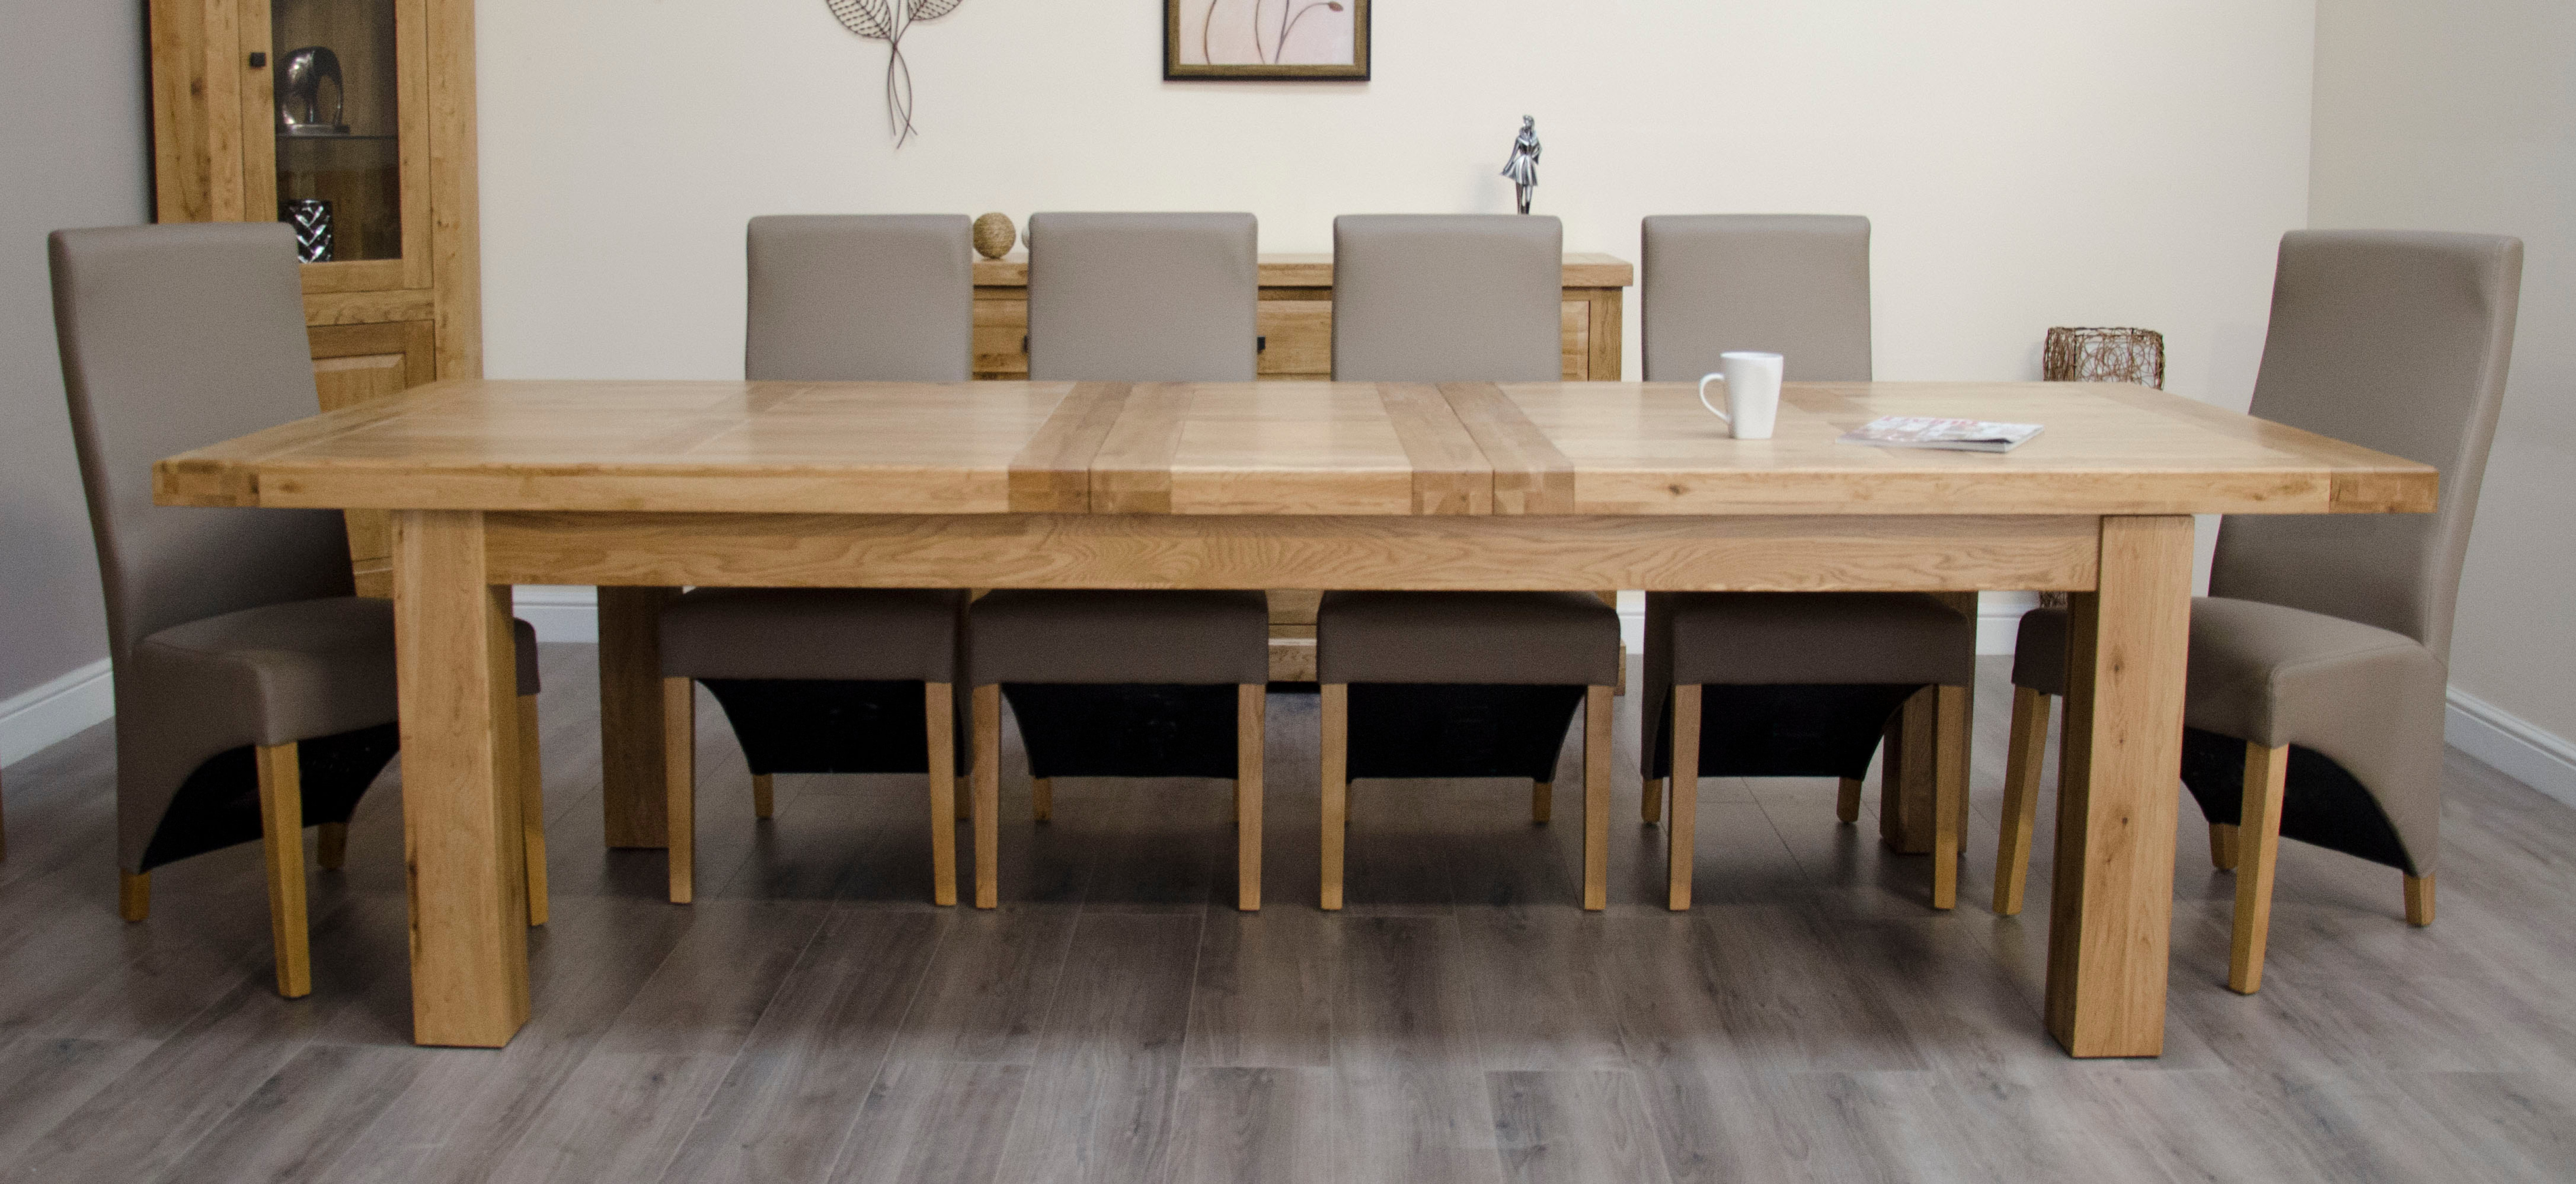 Extra Large Wood Dining Room Tables